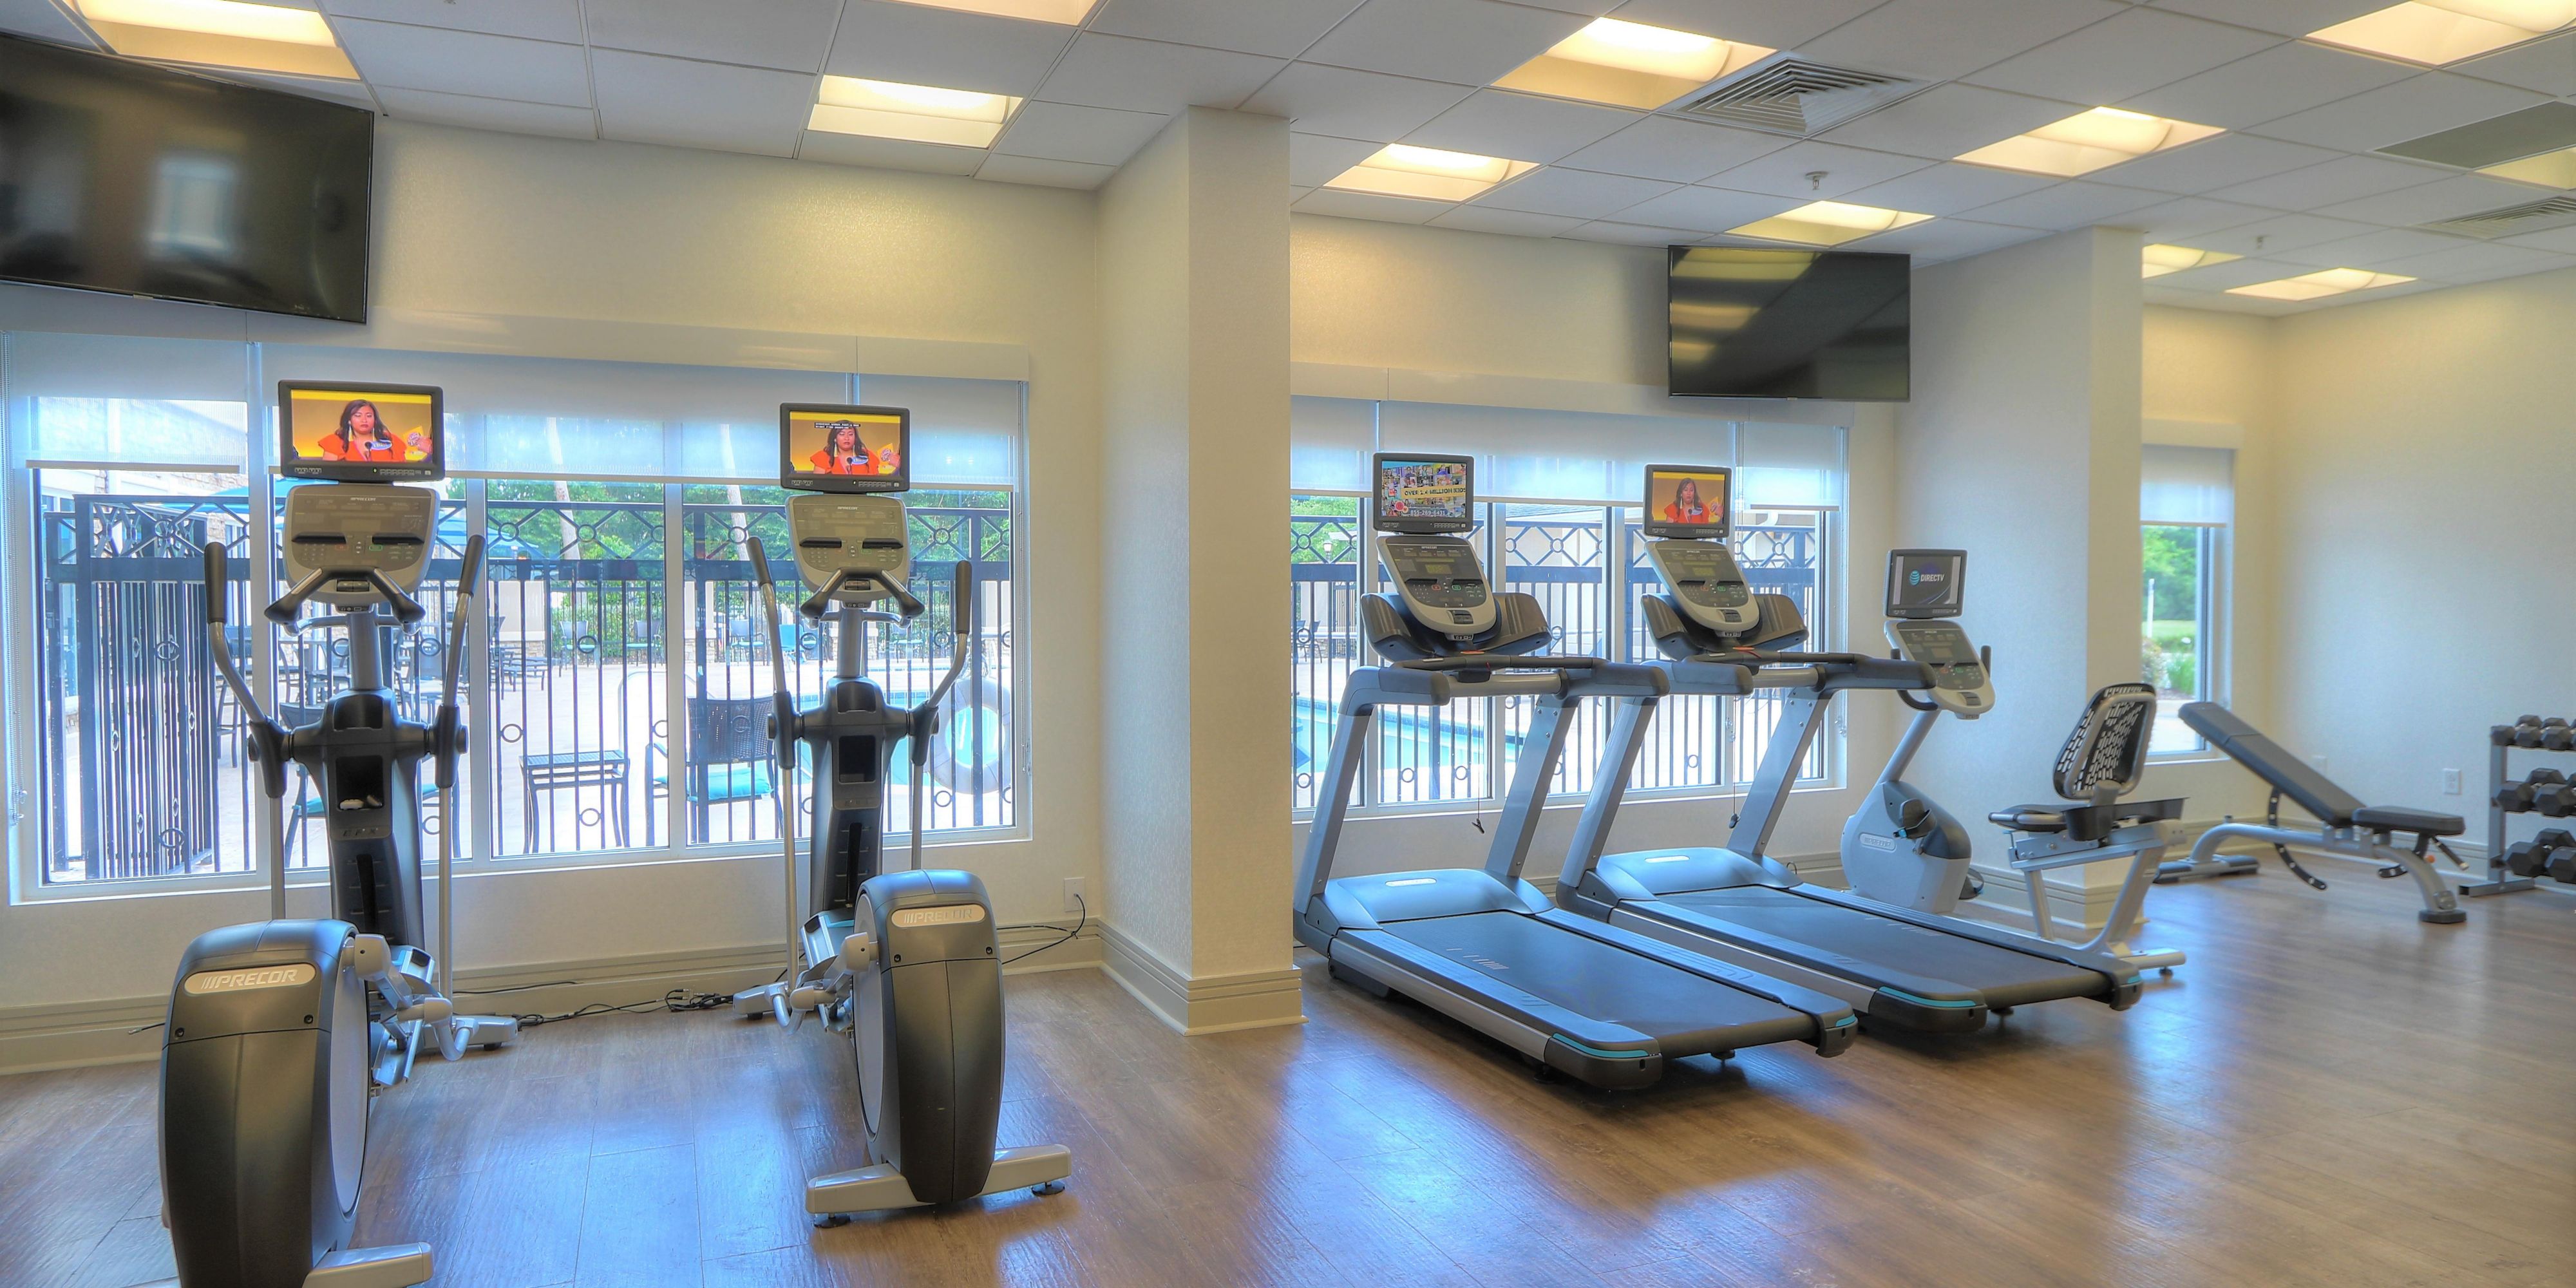 Maintaining your routine while traveling is important, especially when you’re short on time and on the go. We totally get it. Recharge and feel ready for anything with our state of the art fitness center that is open 24 hours a day.